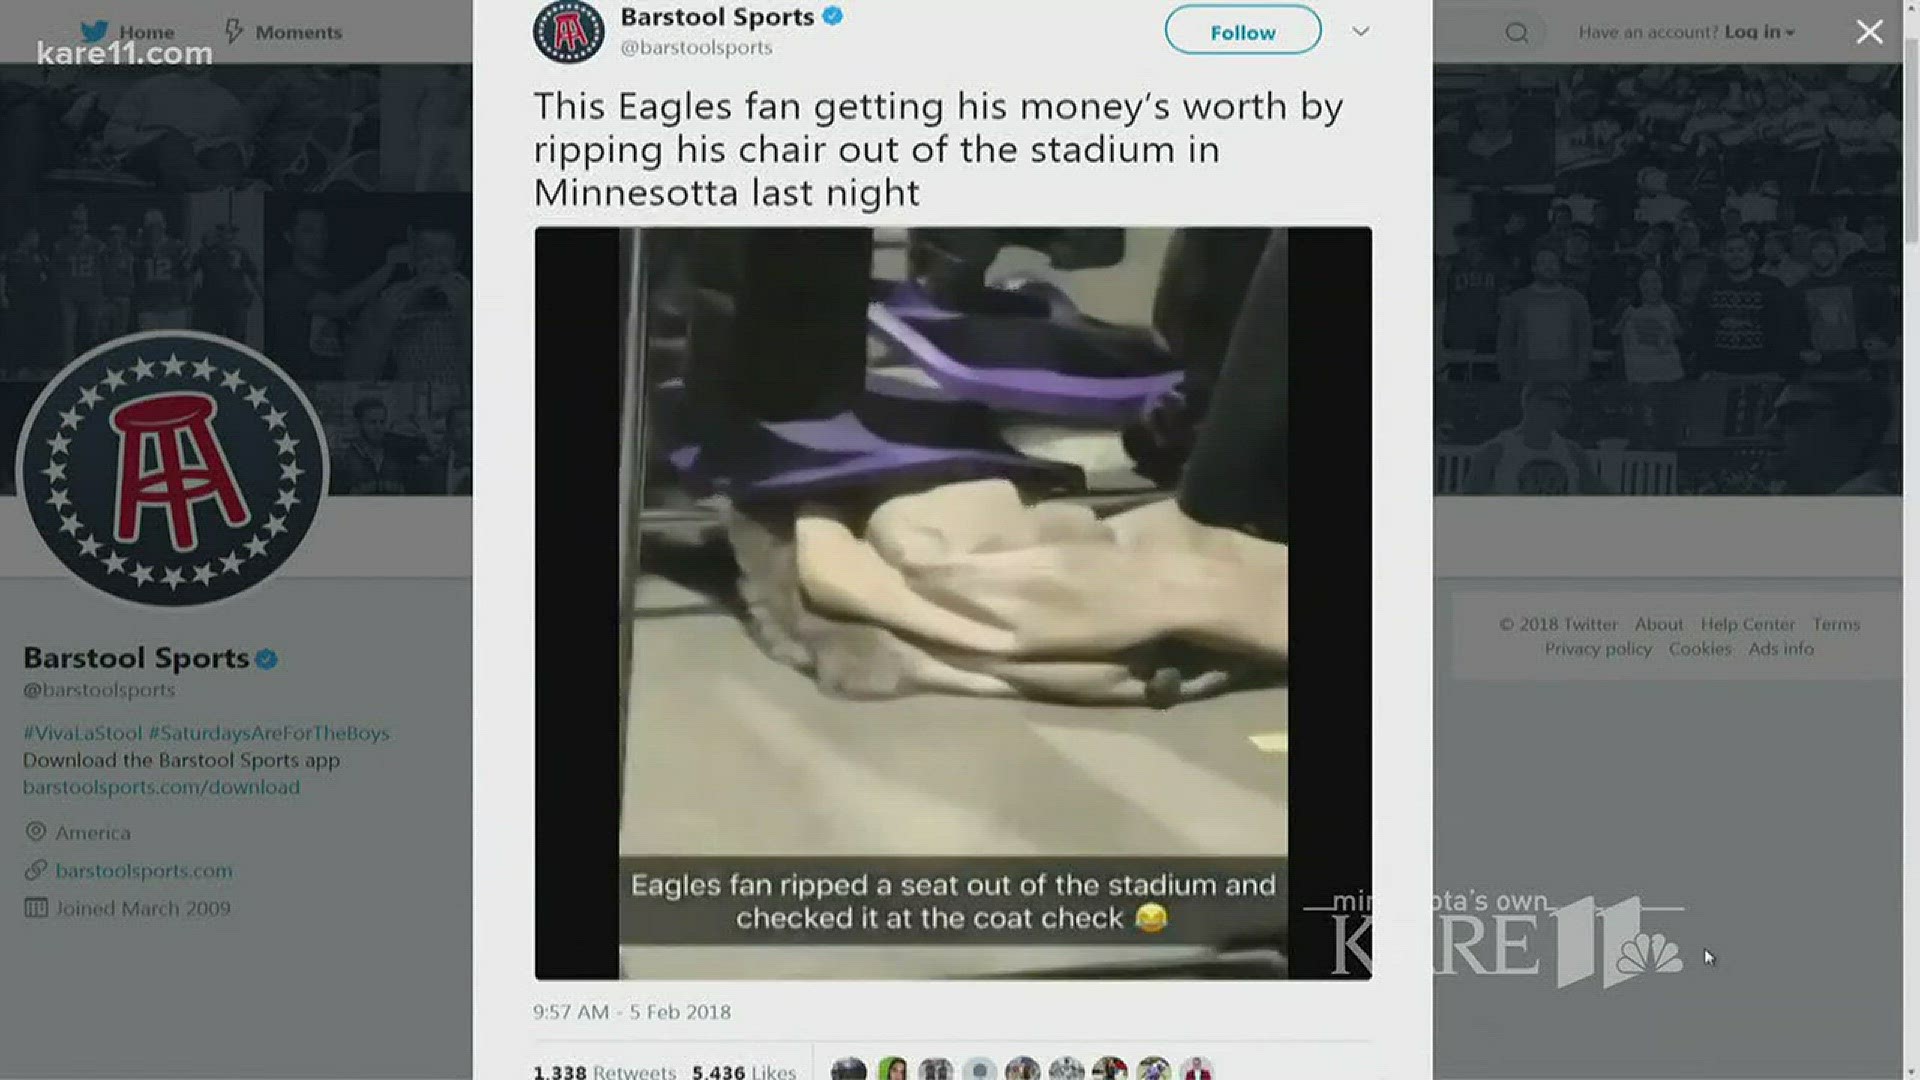 The video, posted by Barstool Sports, allegedly shows an Eagles fan checking the seat at the coat check before leaving with it. http://kare11.tv/2E6ykT9